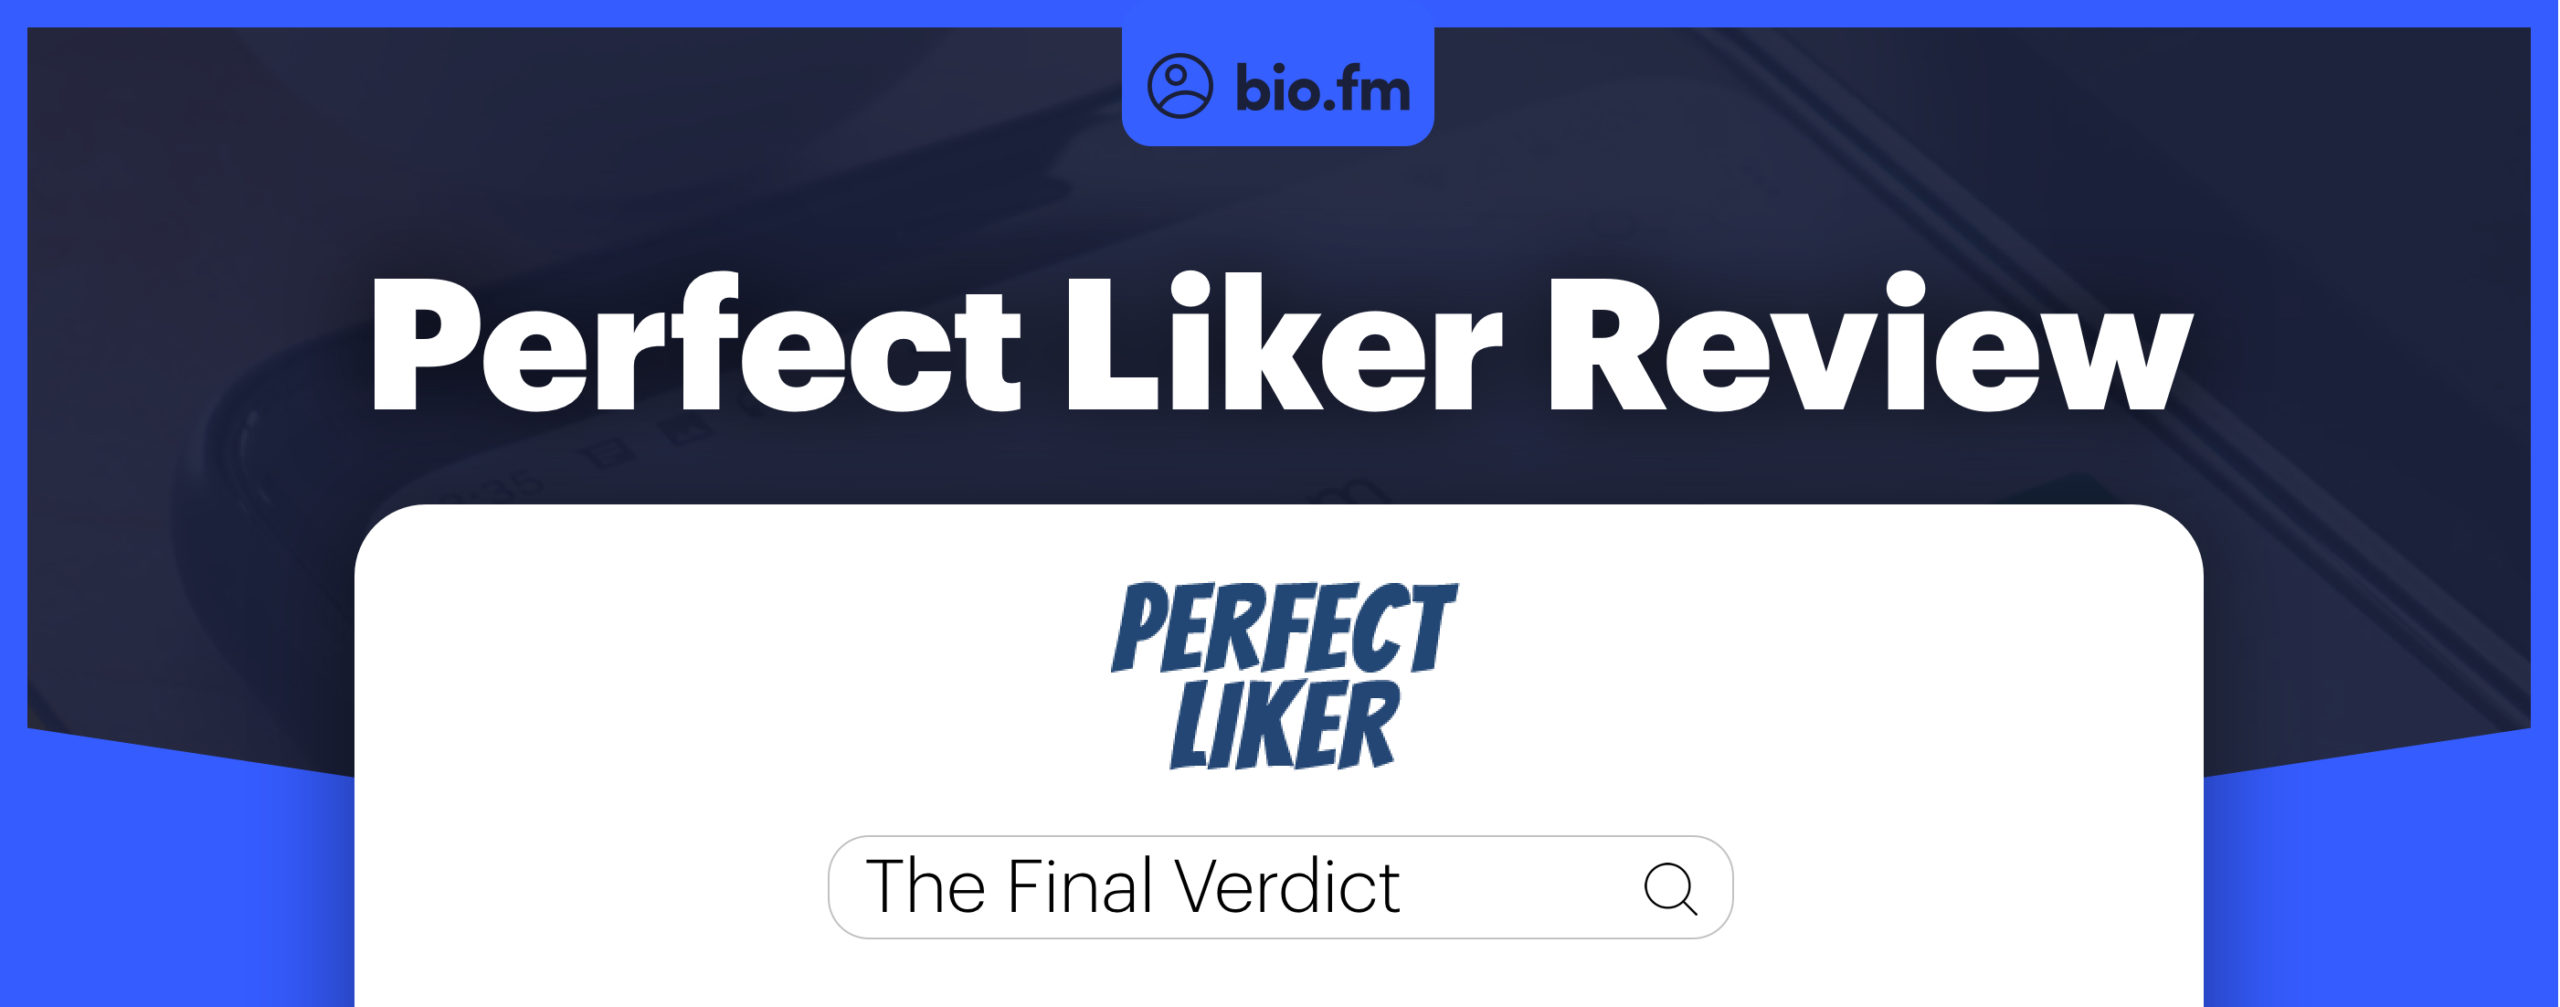 perfectliker review featured image